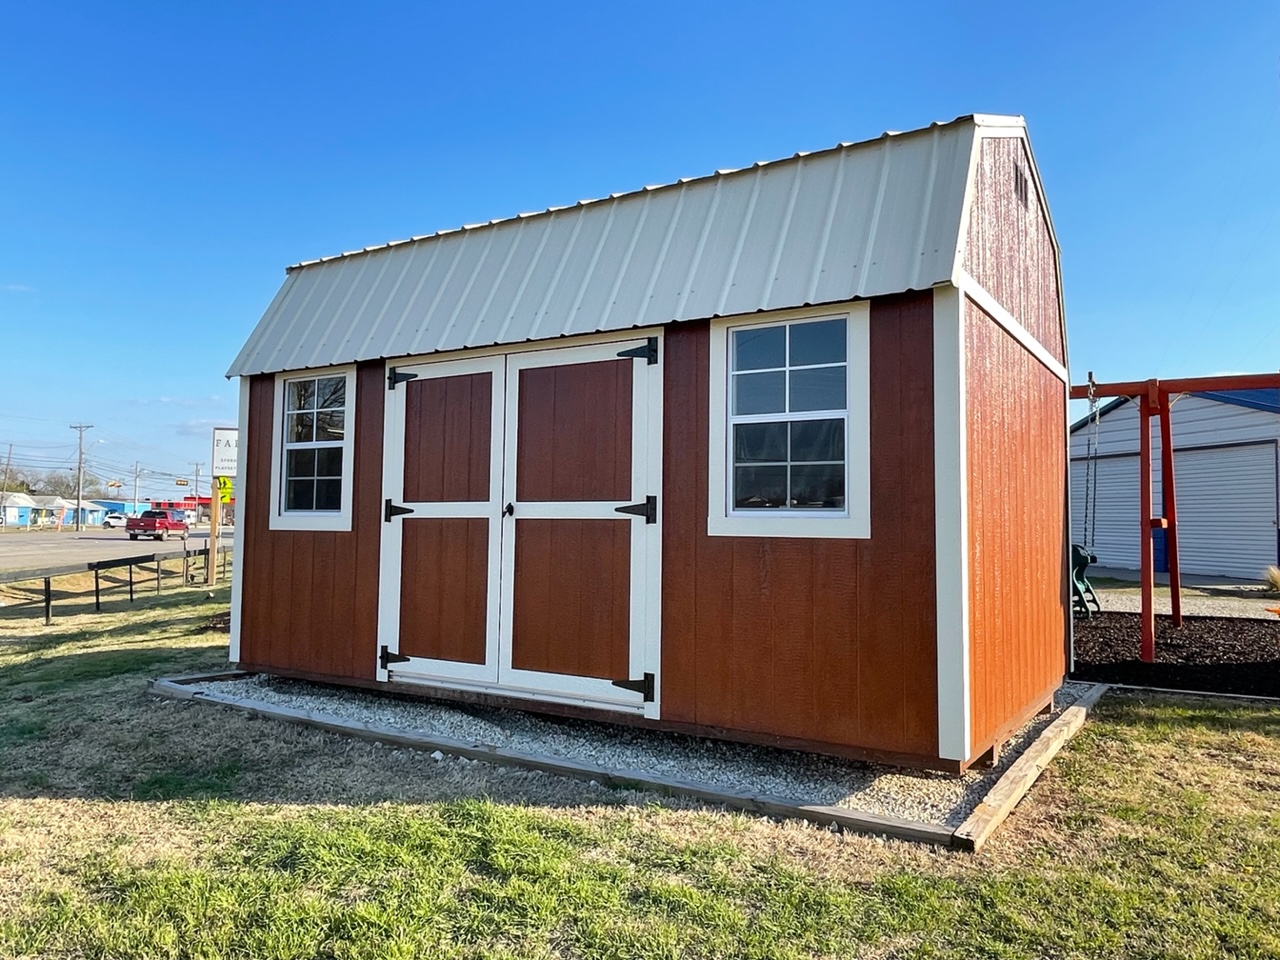 Farm and Yard Central Texas Lelands Painted Sheds Lofted Barn, Tiny Home Shell, Home Office, Home Gym, She Shed, Man Cave